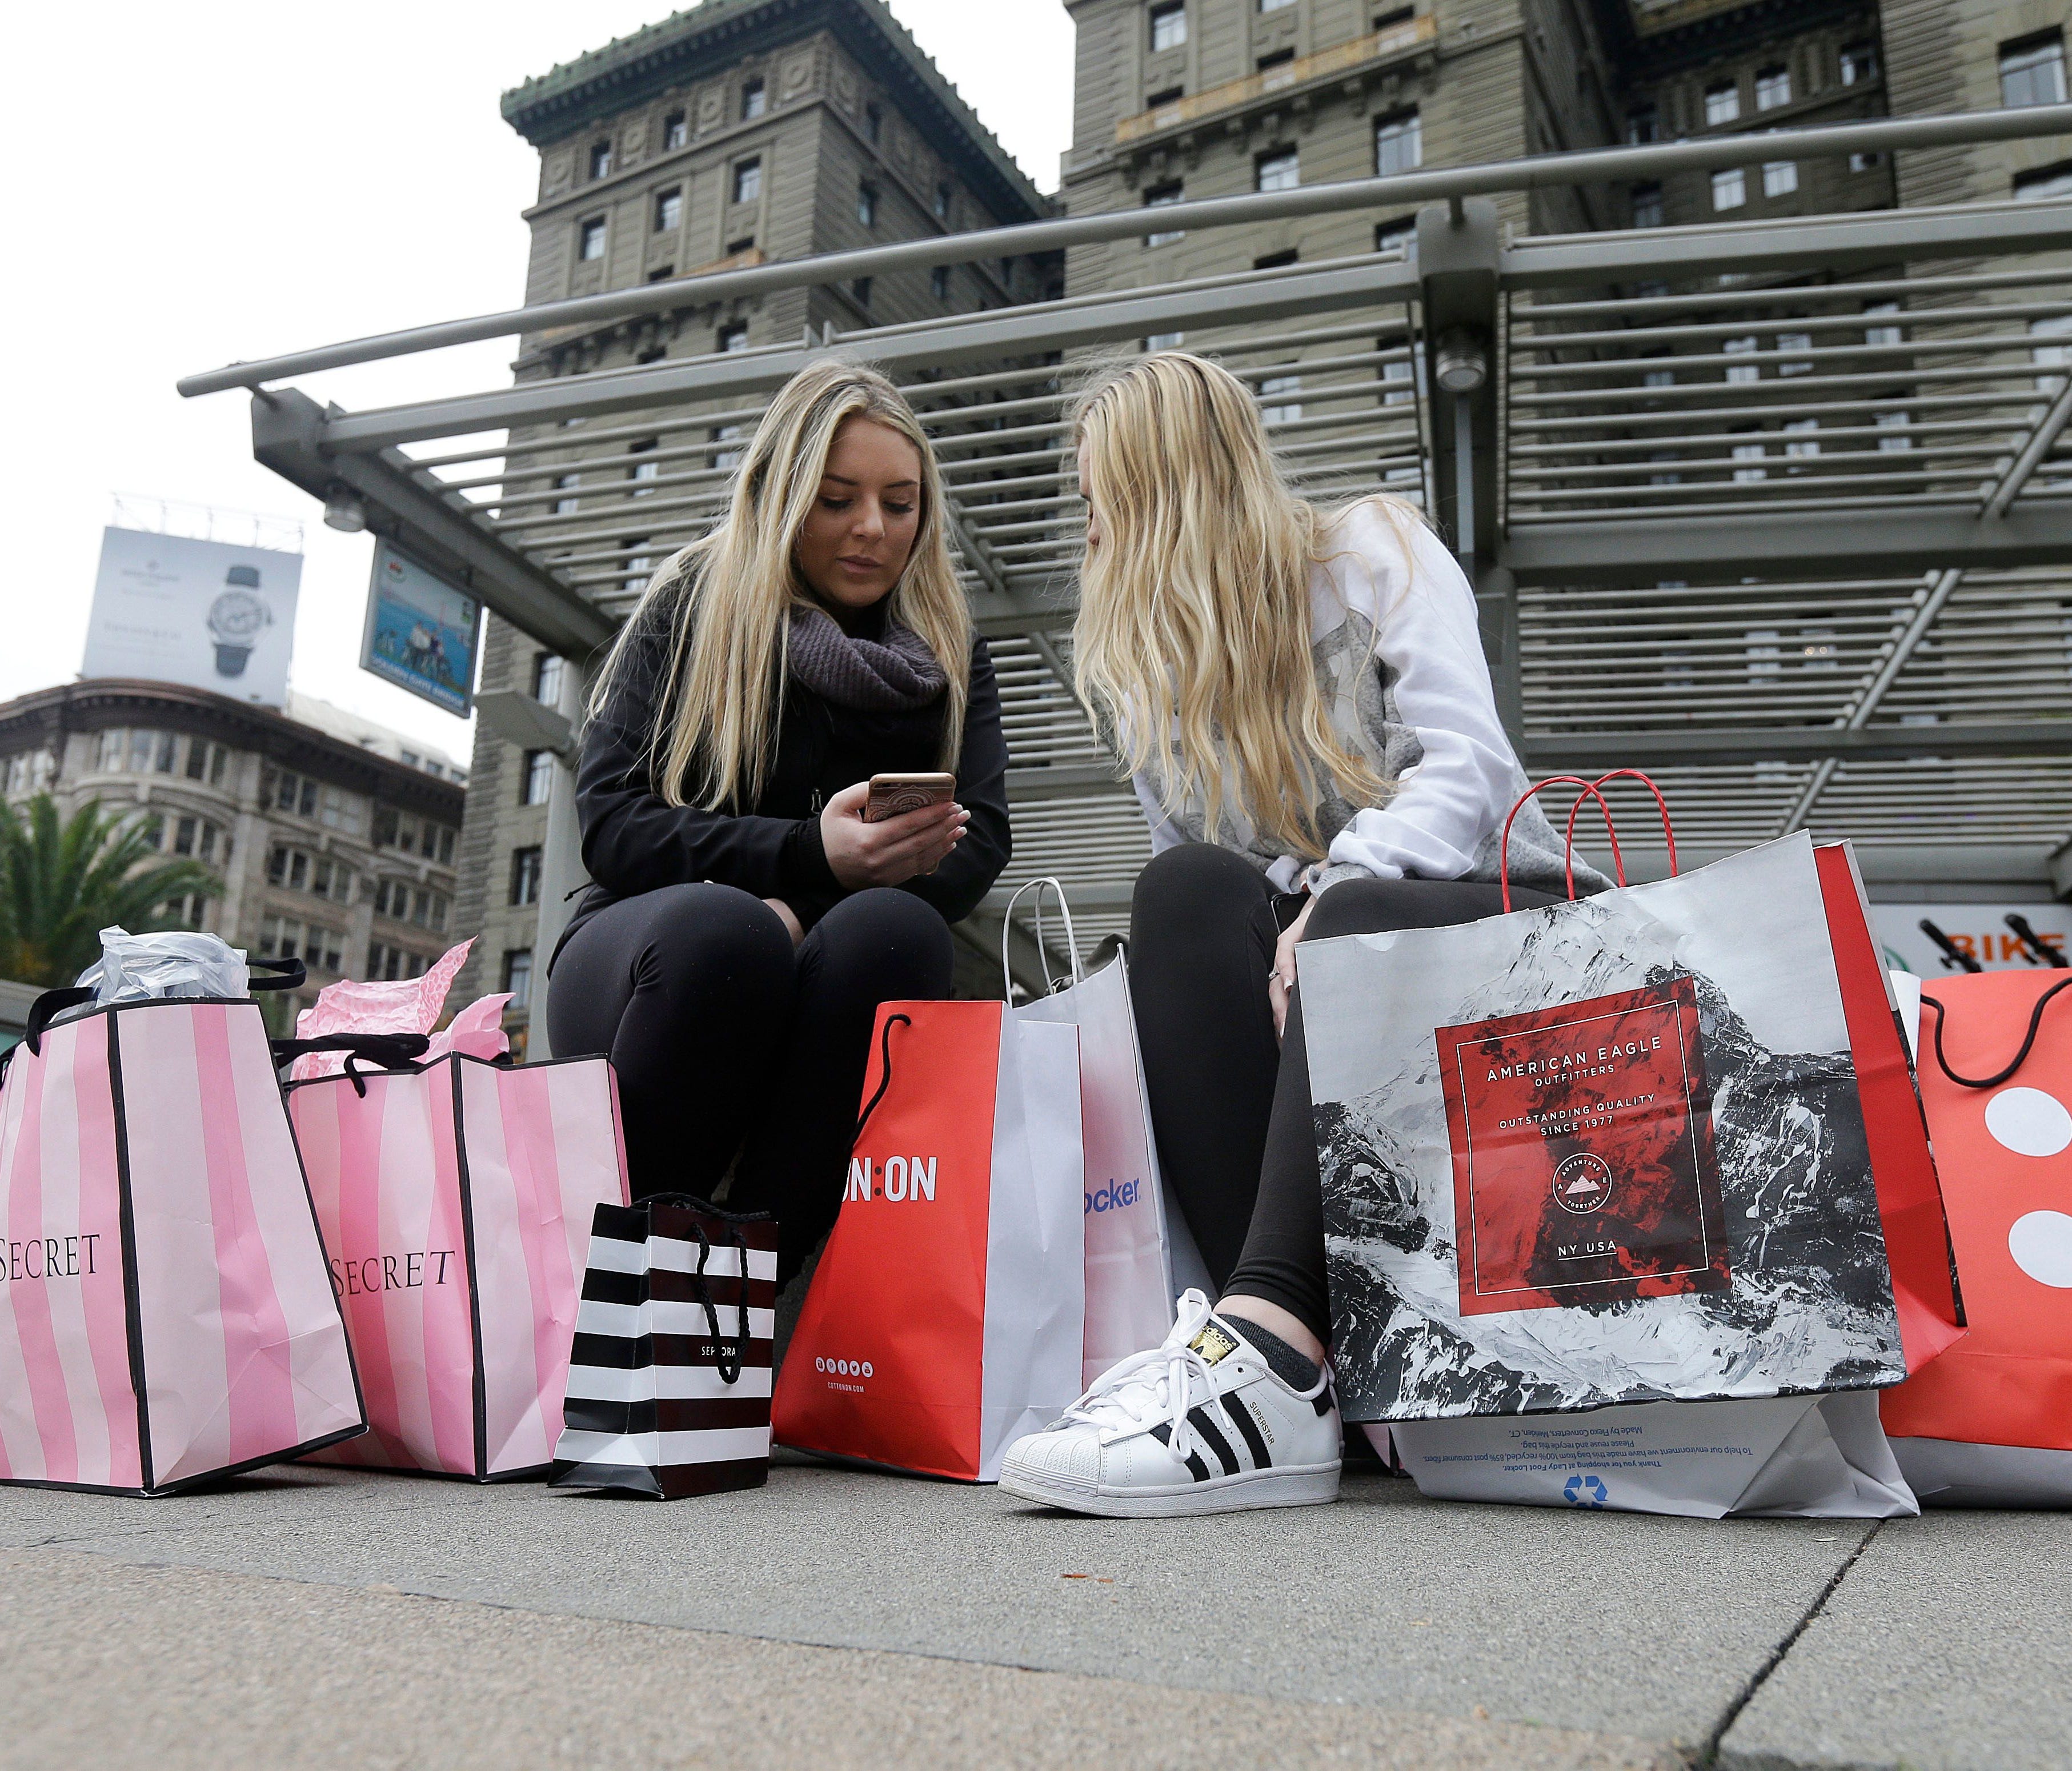 Thanksgiving weekend, through Cyber Monday, is expected to be the busiest online shopping stretch of the holiday season this year, says software firm Adobe.